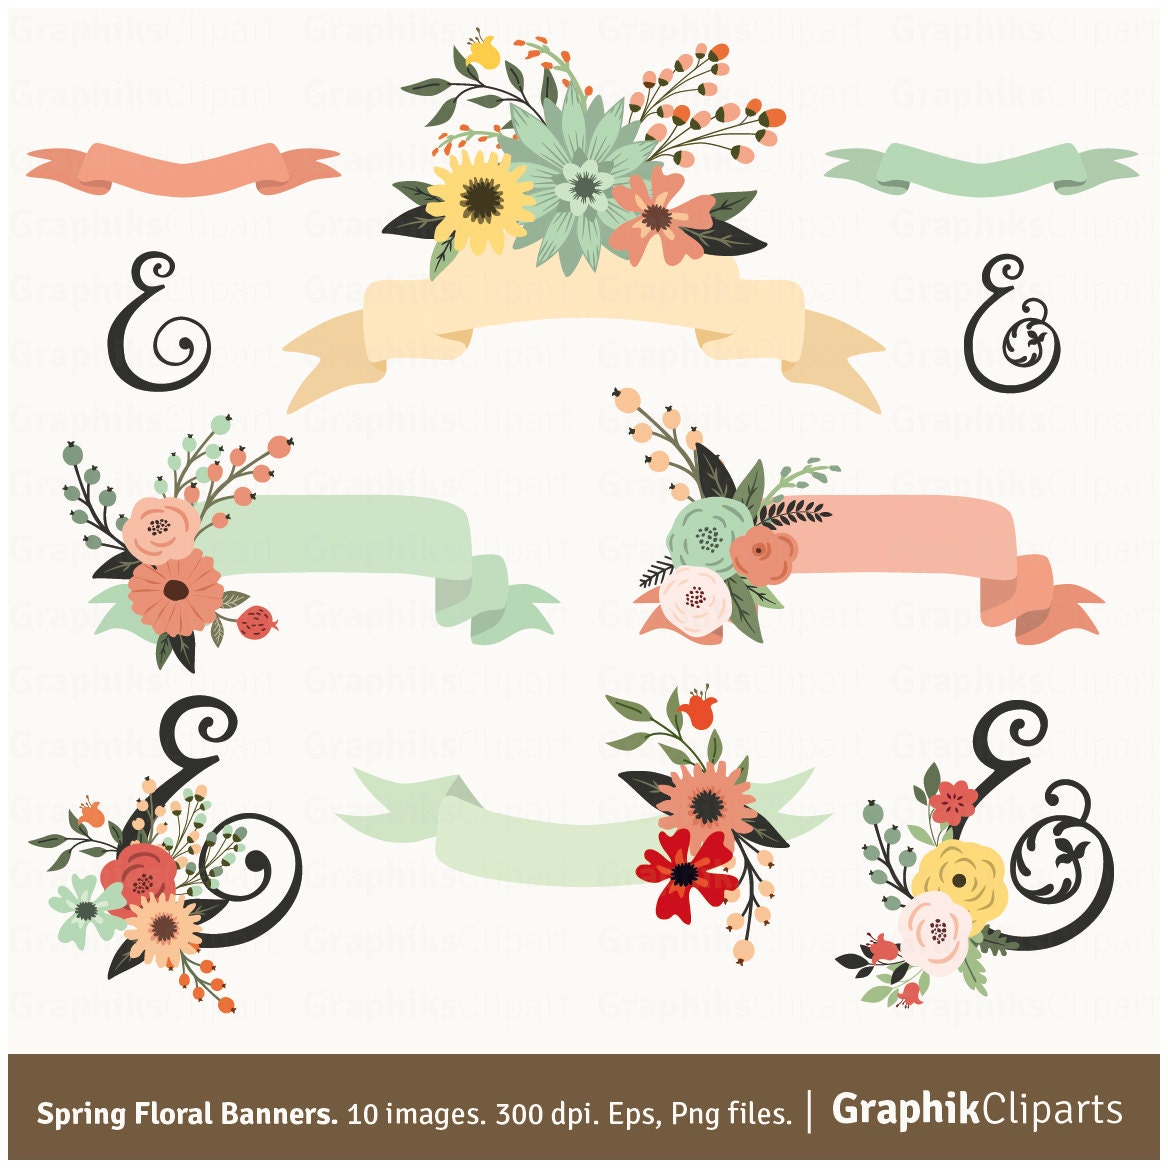 Spring Floral Banners Clip Art. Flowers, Ribbons, Vector ...